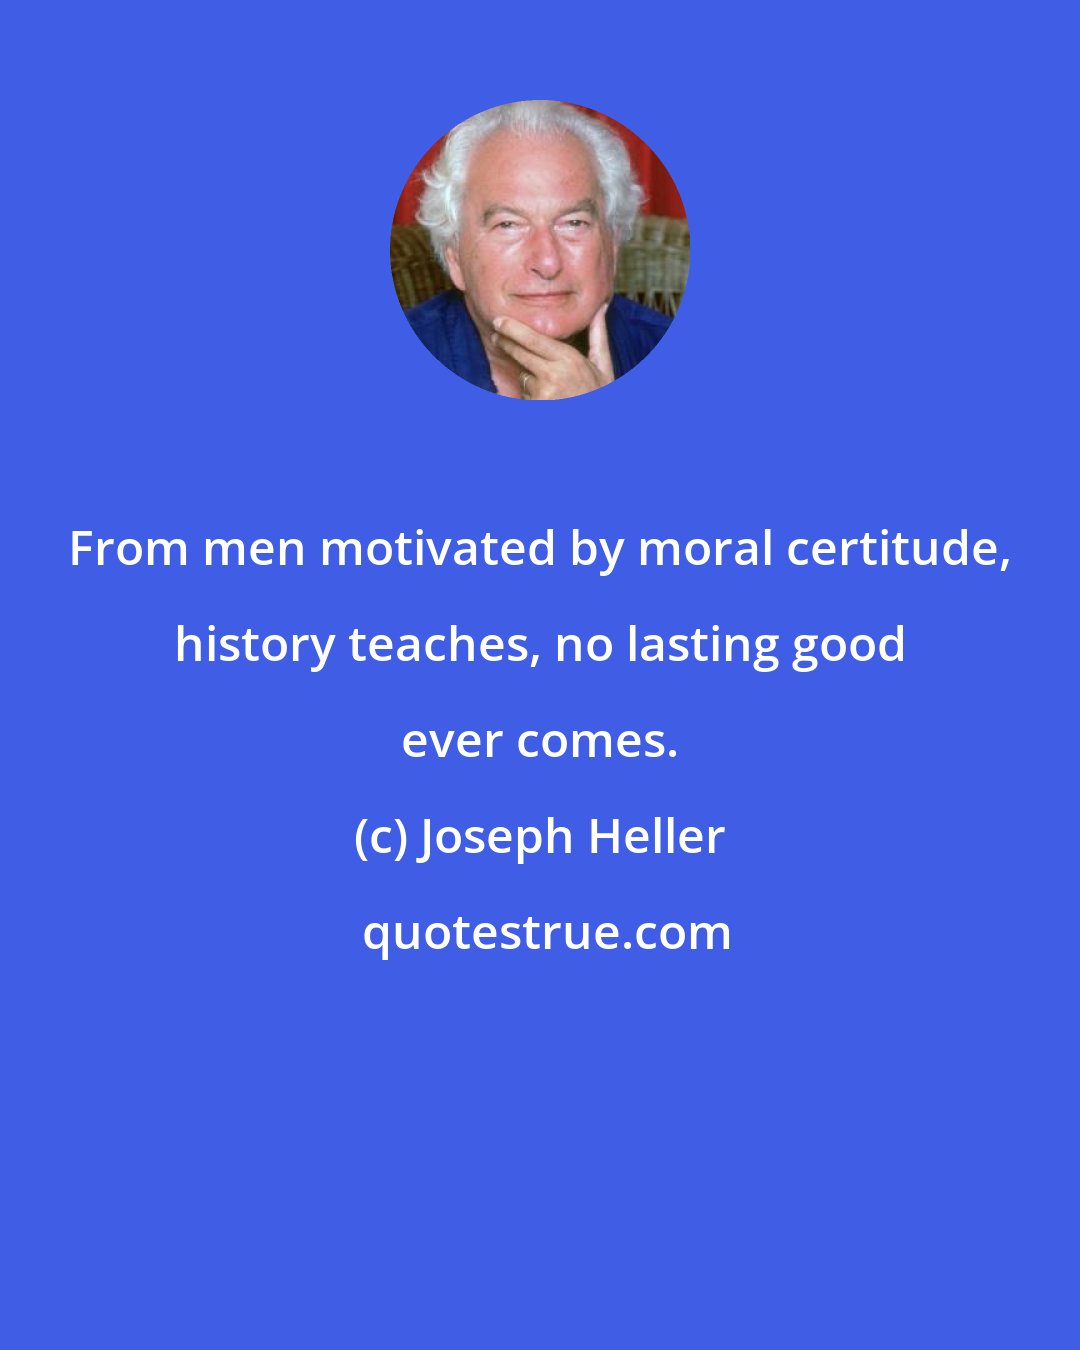 Joseph Heller: From men motivated by moral certitude, history teaches, no lasting good ever comes.